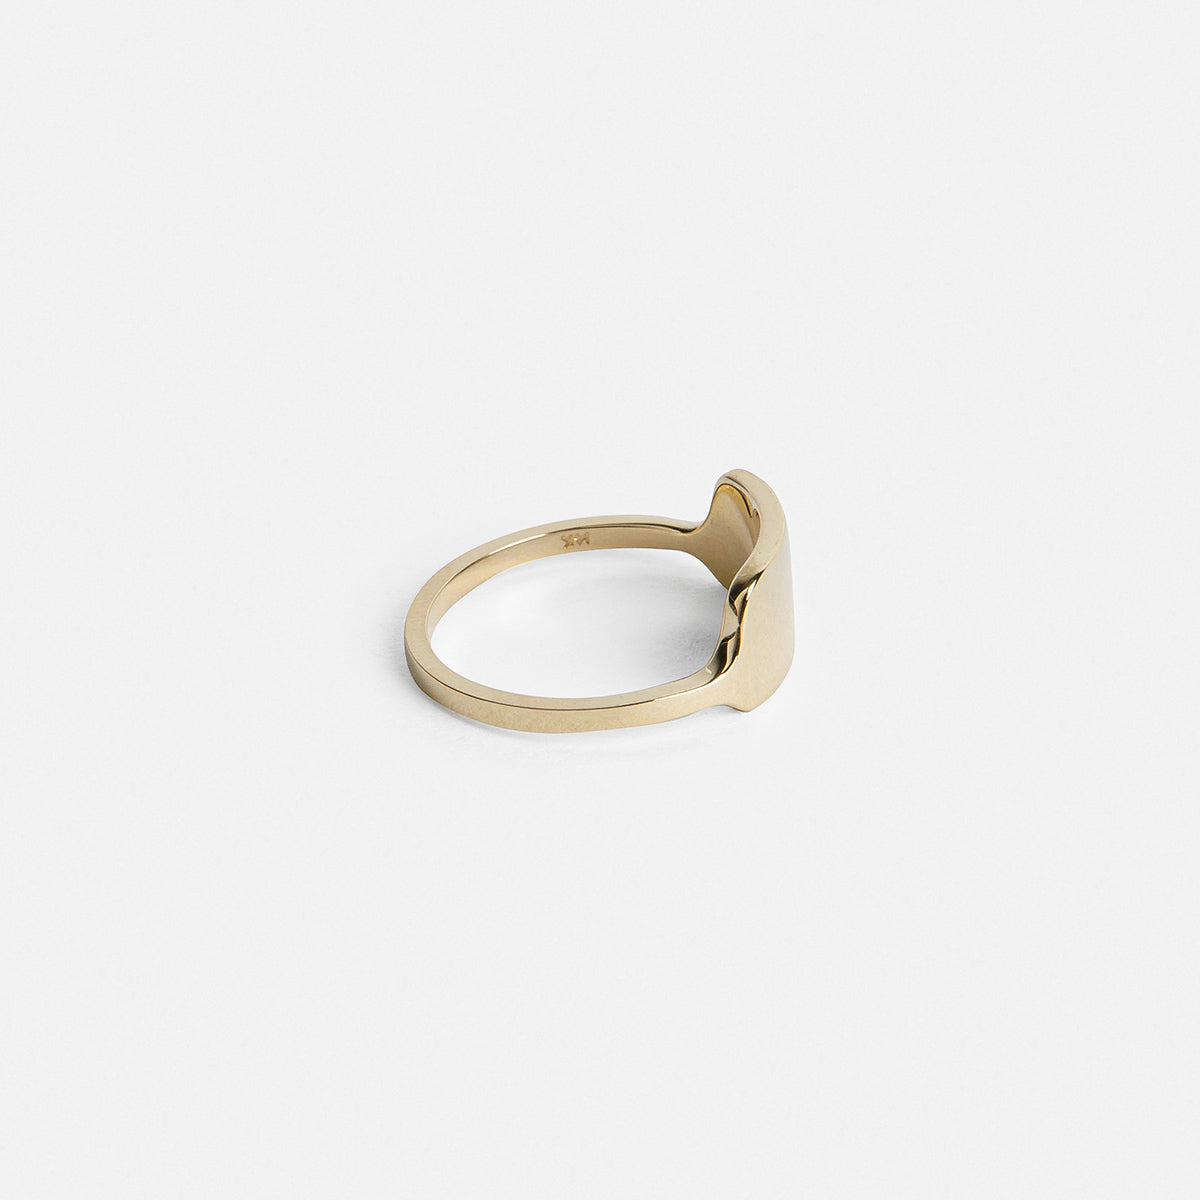 Tylu Unique Ring in 14k Gold By SHW Fine Jewelry NYC